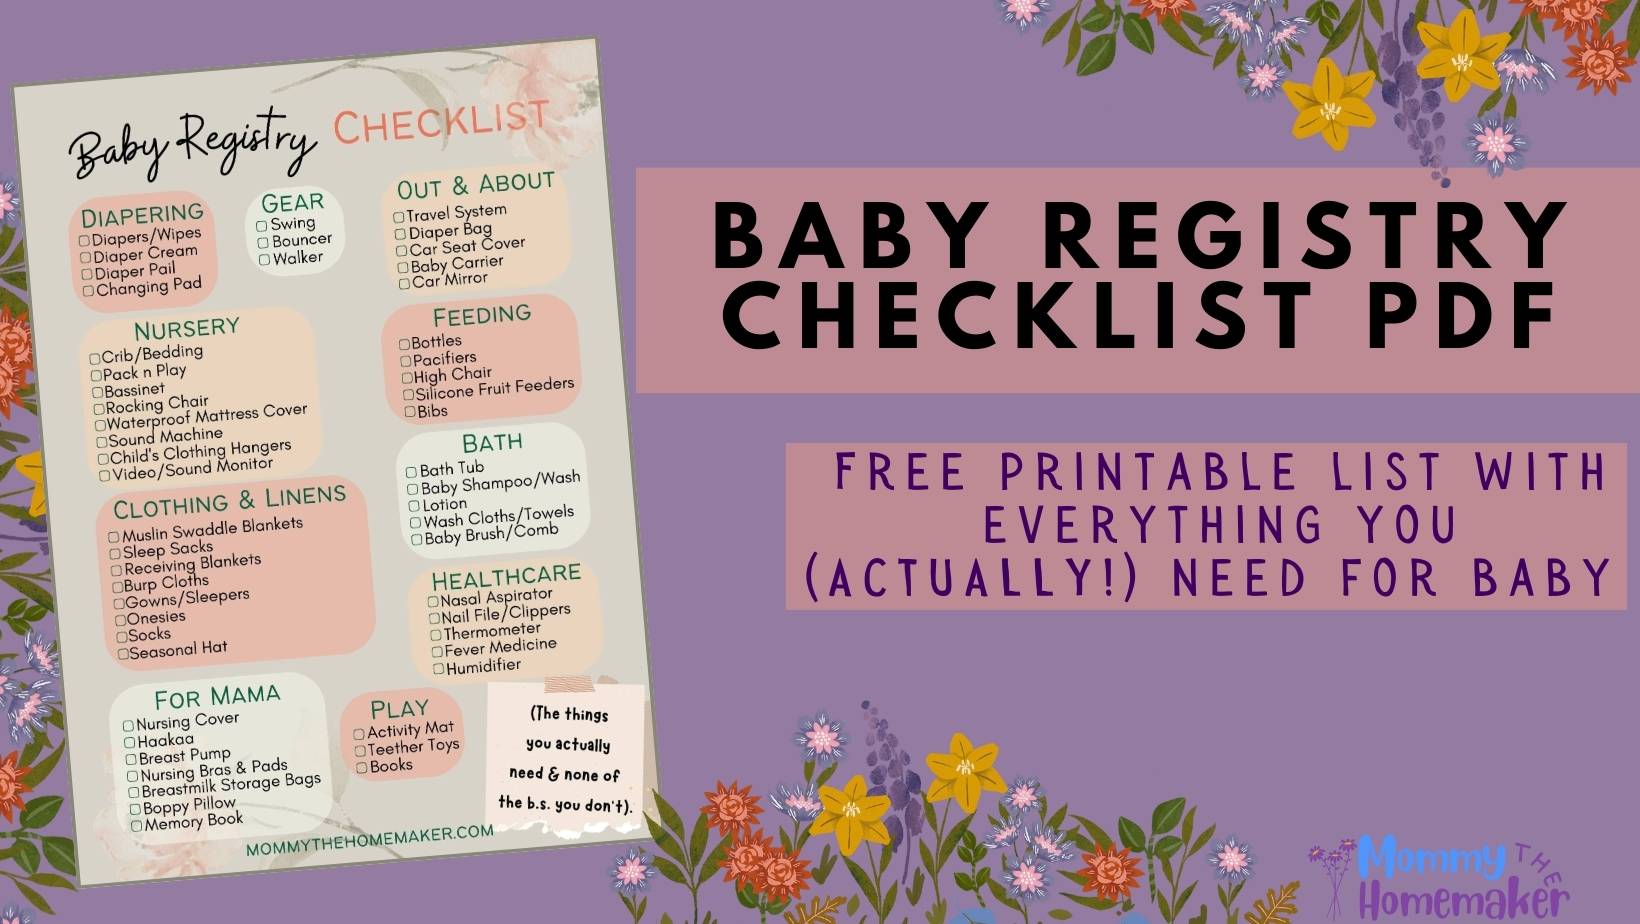 Baby Registry Checklist: Don't Forget the Toys!